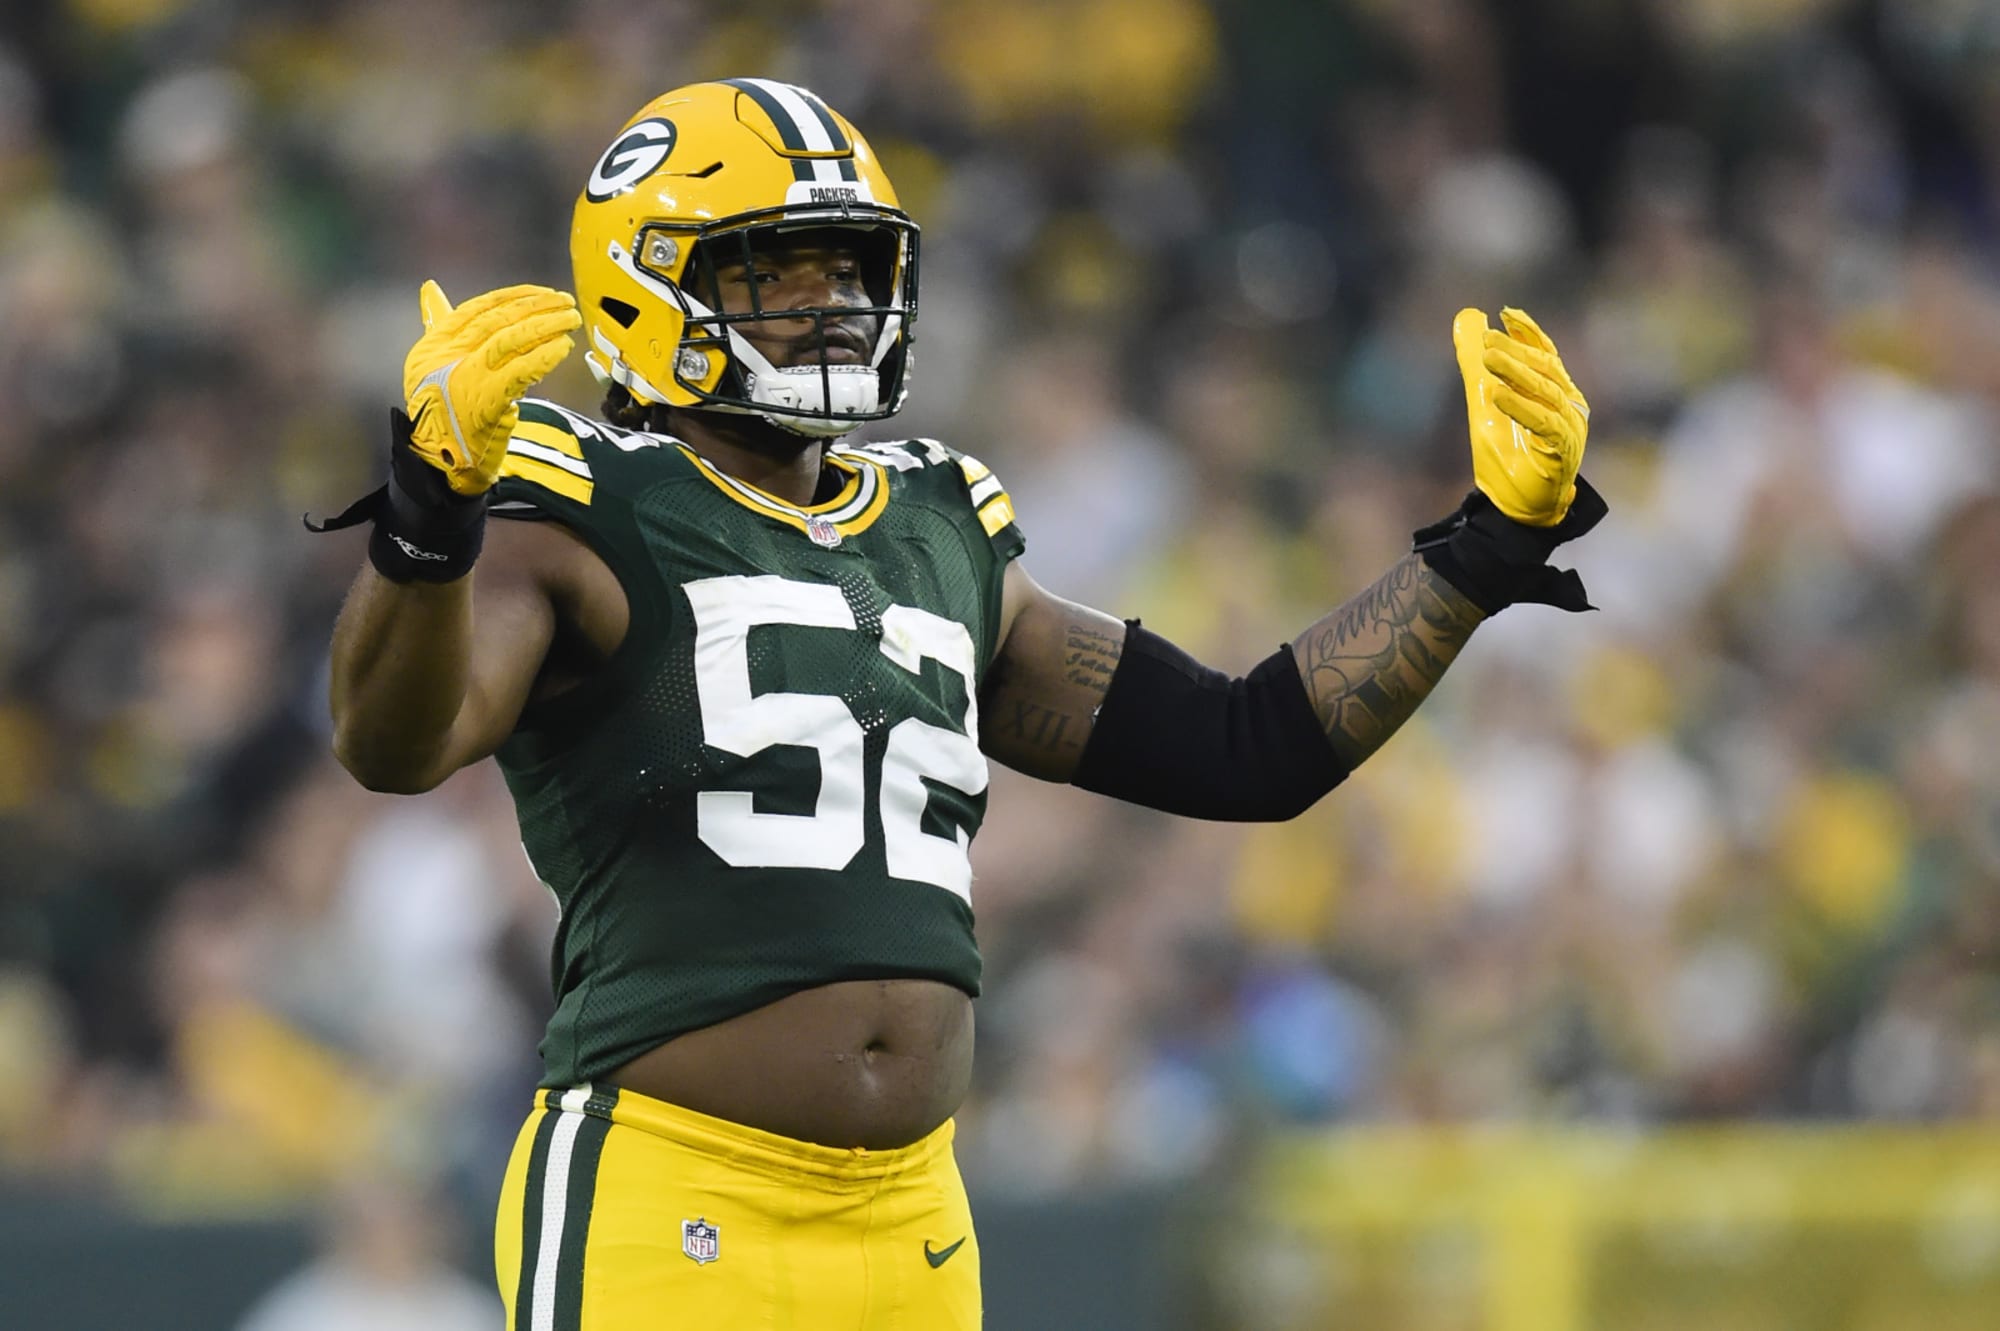 Packers' Watkins, Buccaneers' Godwin ruled out for Sunday's game